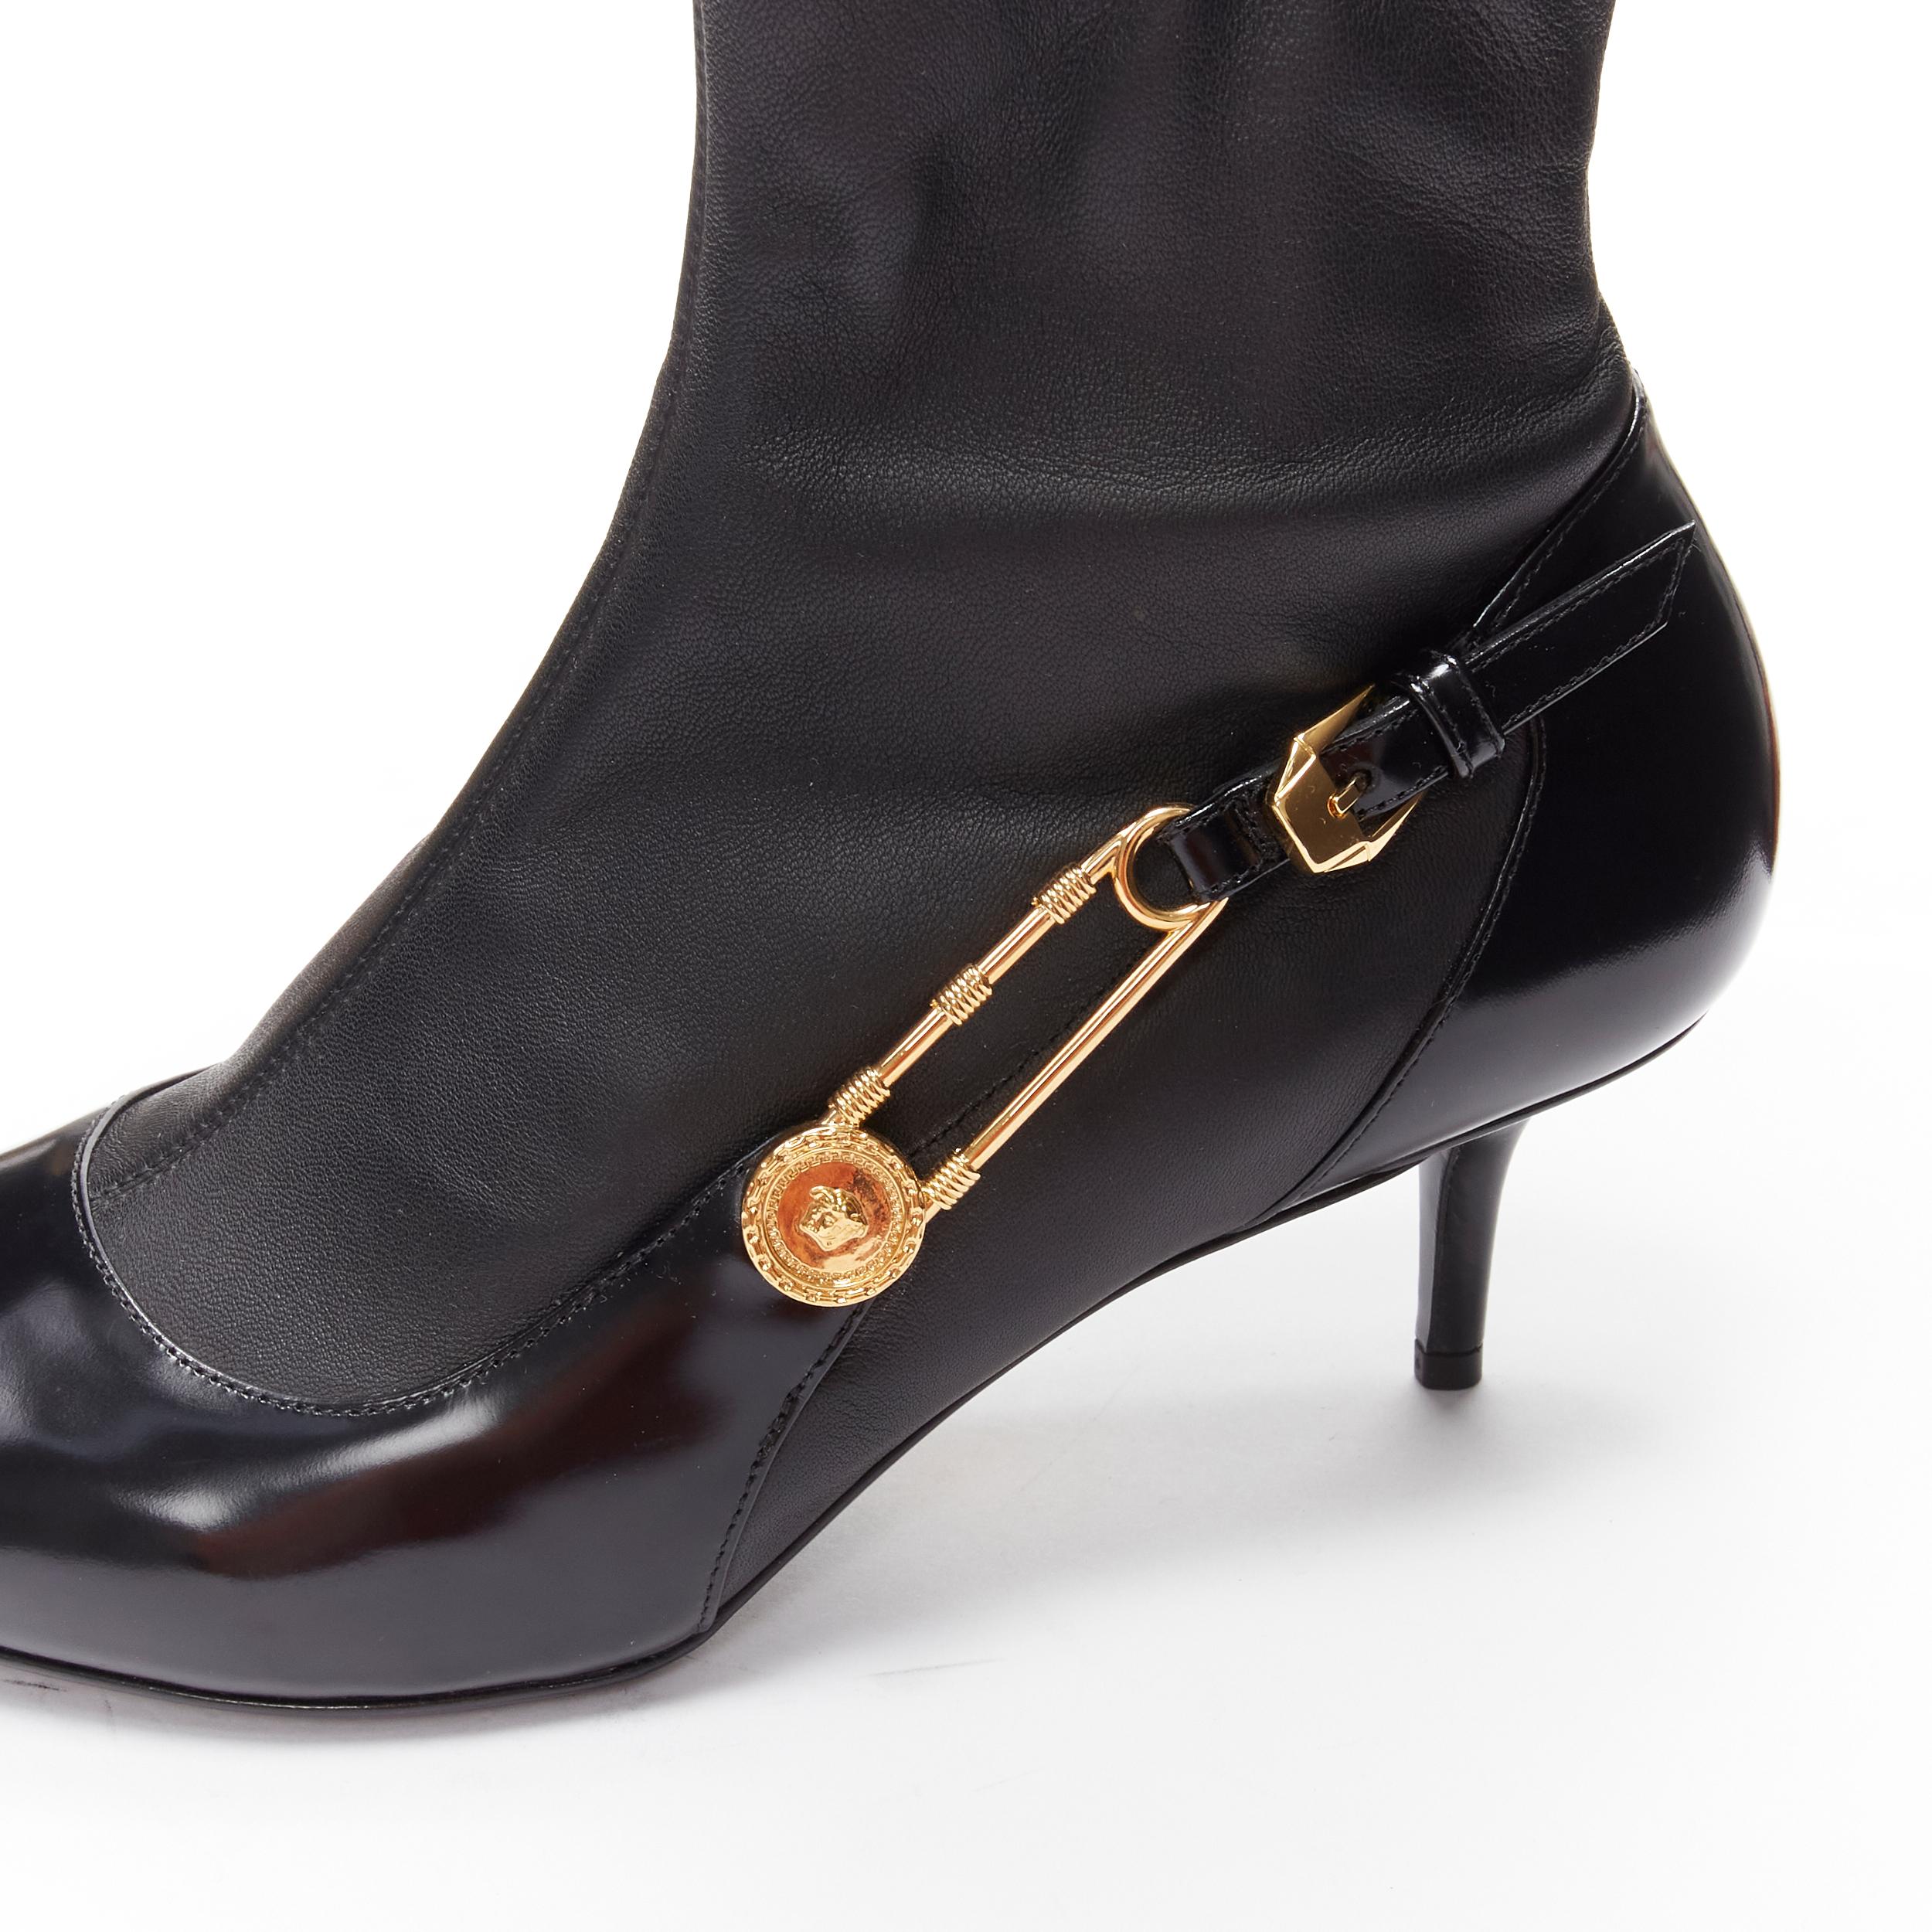 VERSACE gold Medusa Punk Safety Pin black leather kitten heel bootie EU37
Reference: TGAS/C01778
Brand: Versace
Designer: Donatella Versace
Model: DST422H DNA28 D41OH
Material: Leather
Color: Black
Pattern: Solid
Extra Details: Soft leather sock